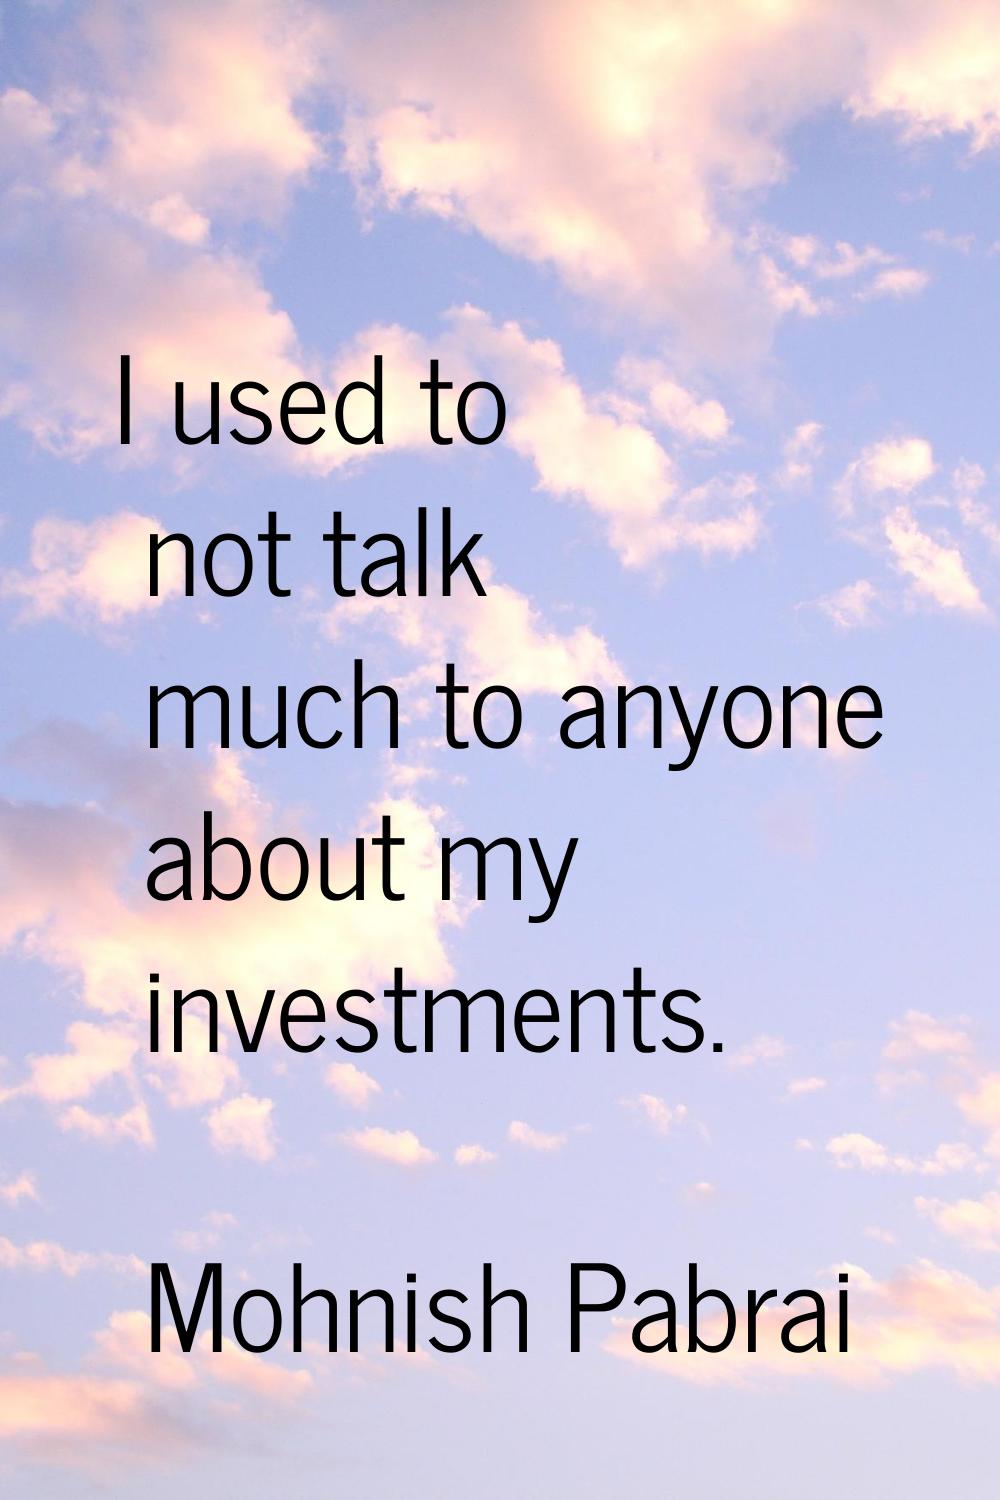 I used to not talk much to anyone about my investments.